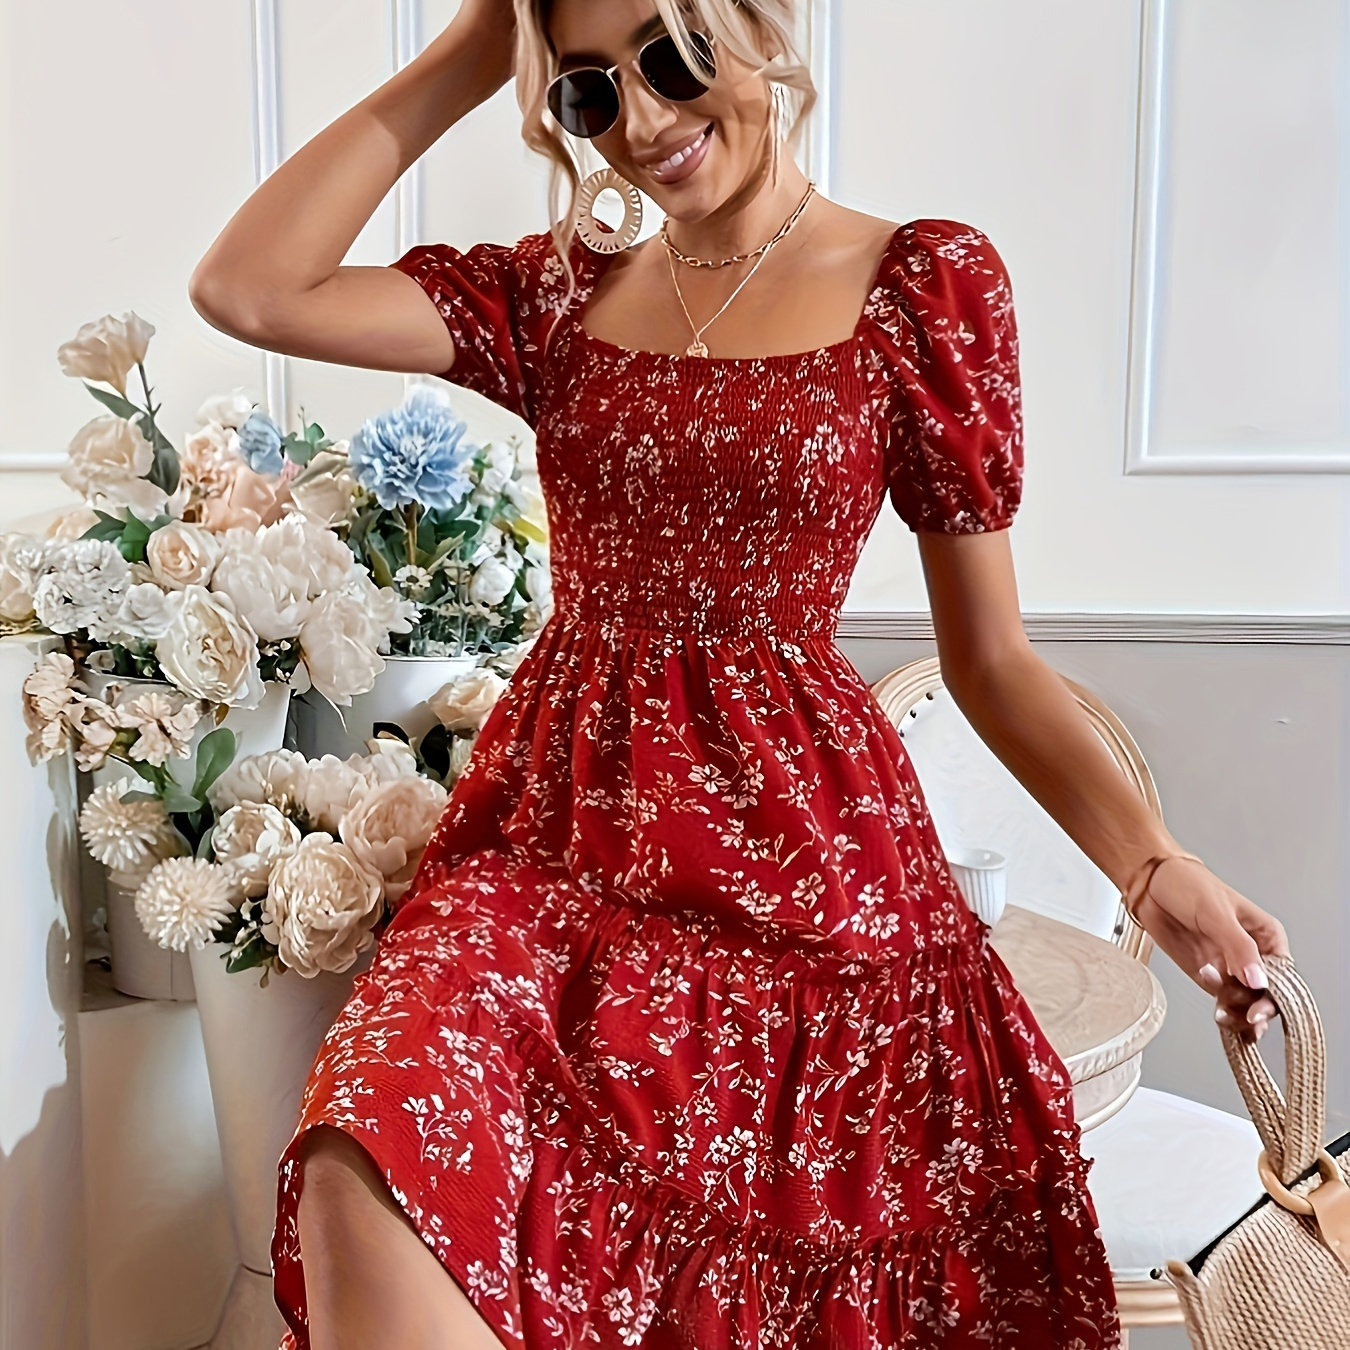 

Floral Square Neck Dress, Elegant Puff Sleeve Shirred Dress For Spring & Summer, Women's Clothing